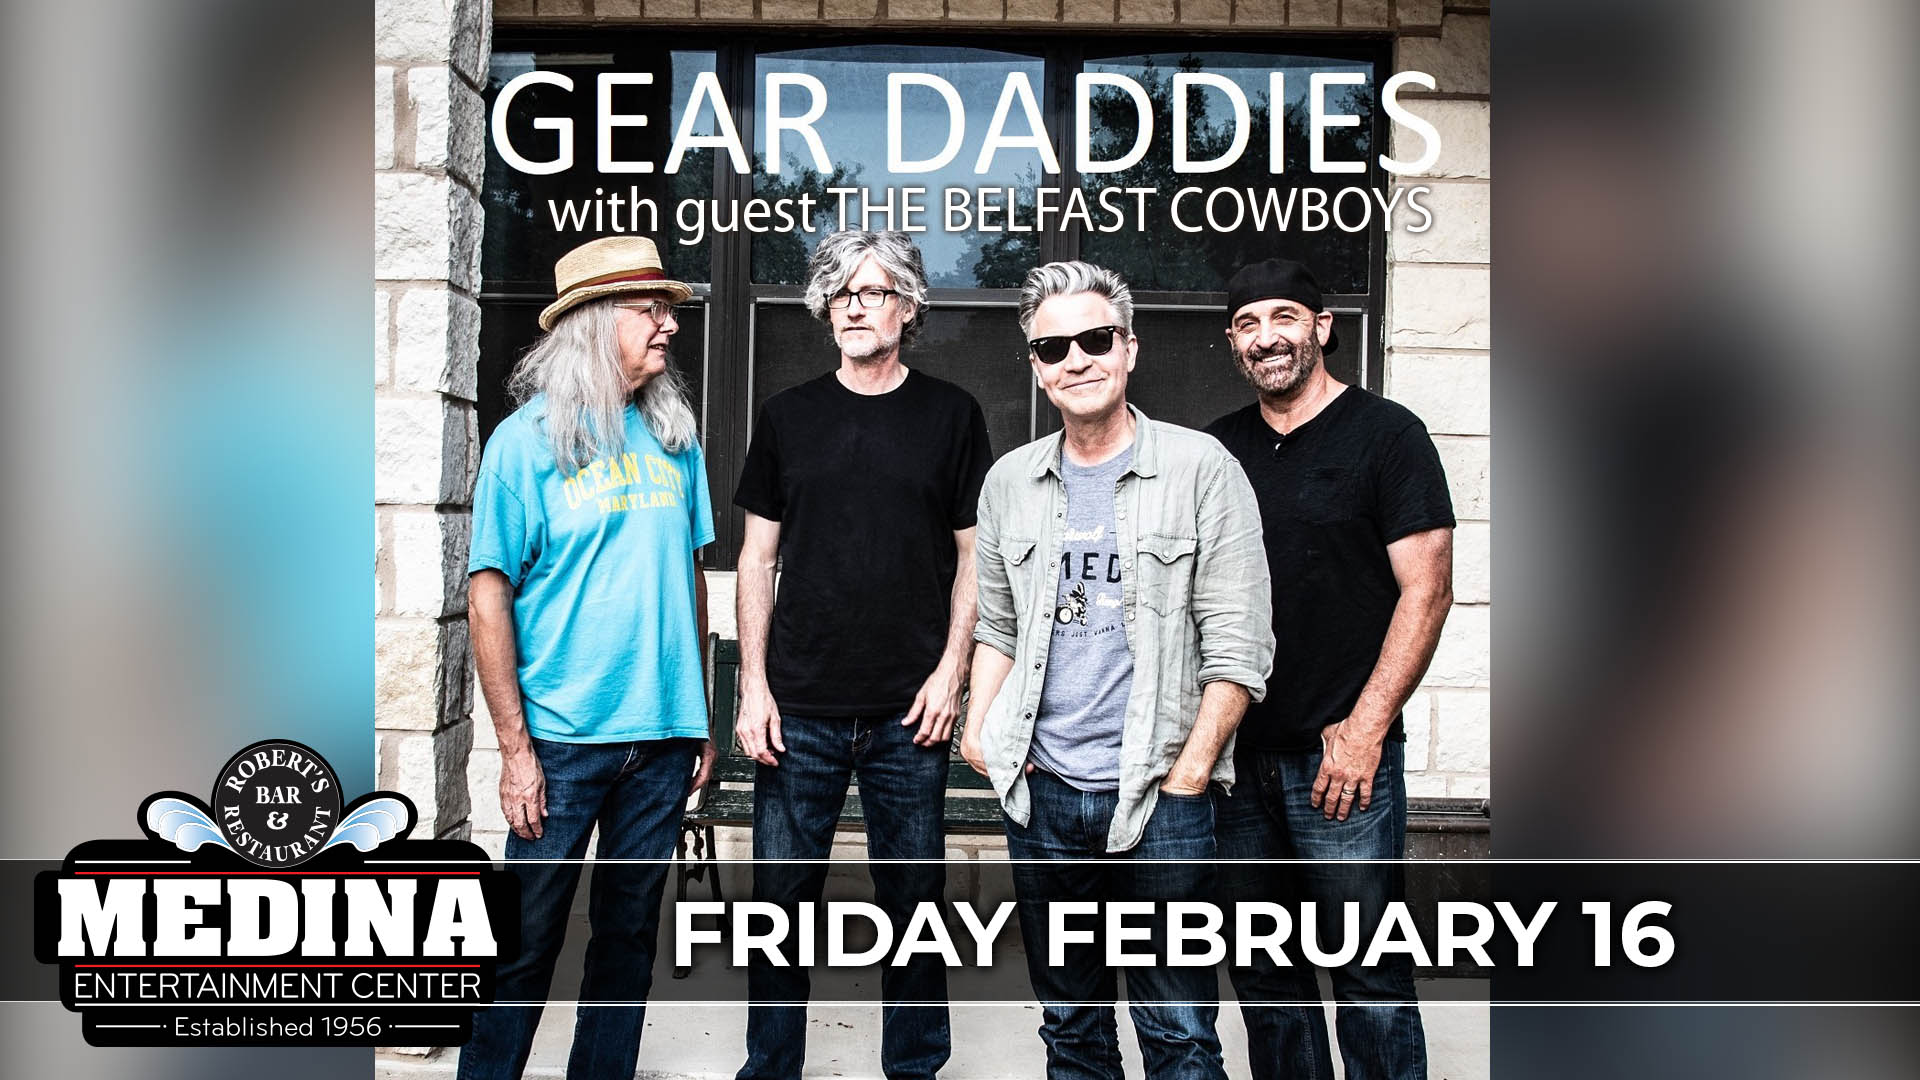 GEAR DADDIES with guest TBA Medina Entertainment Center Friday, February 16, 2024 Doors: 7:00 PM | Music: 8:00 PM | 21+ Tickets on-sale Friday, December 1 at 11am GA Ticket Prices: $28 Advance / $33 Day Of Show plus applicable fees